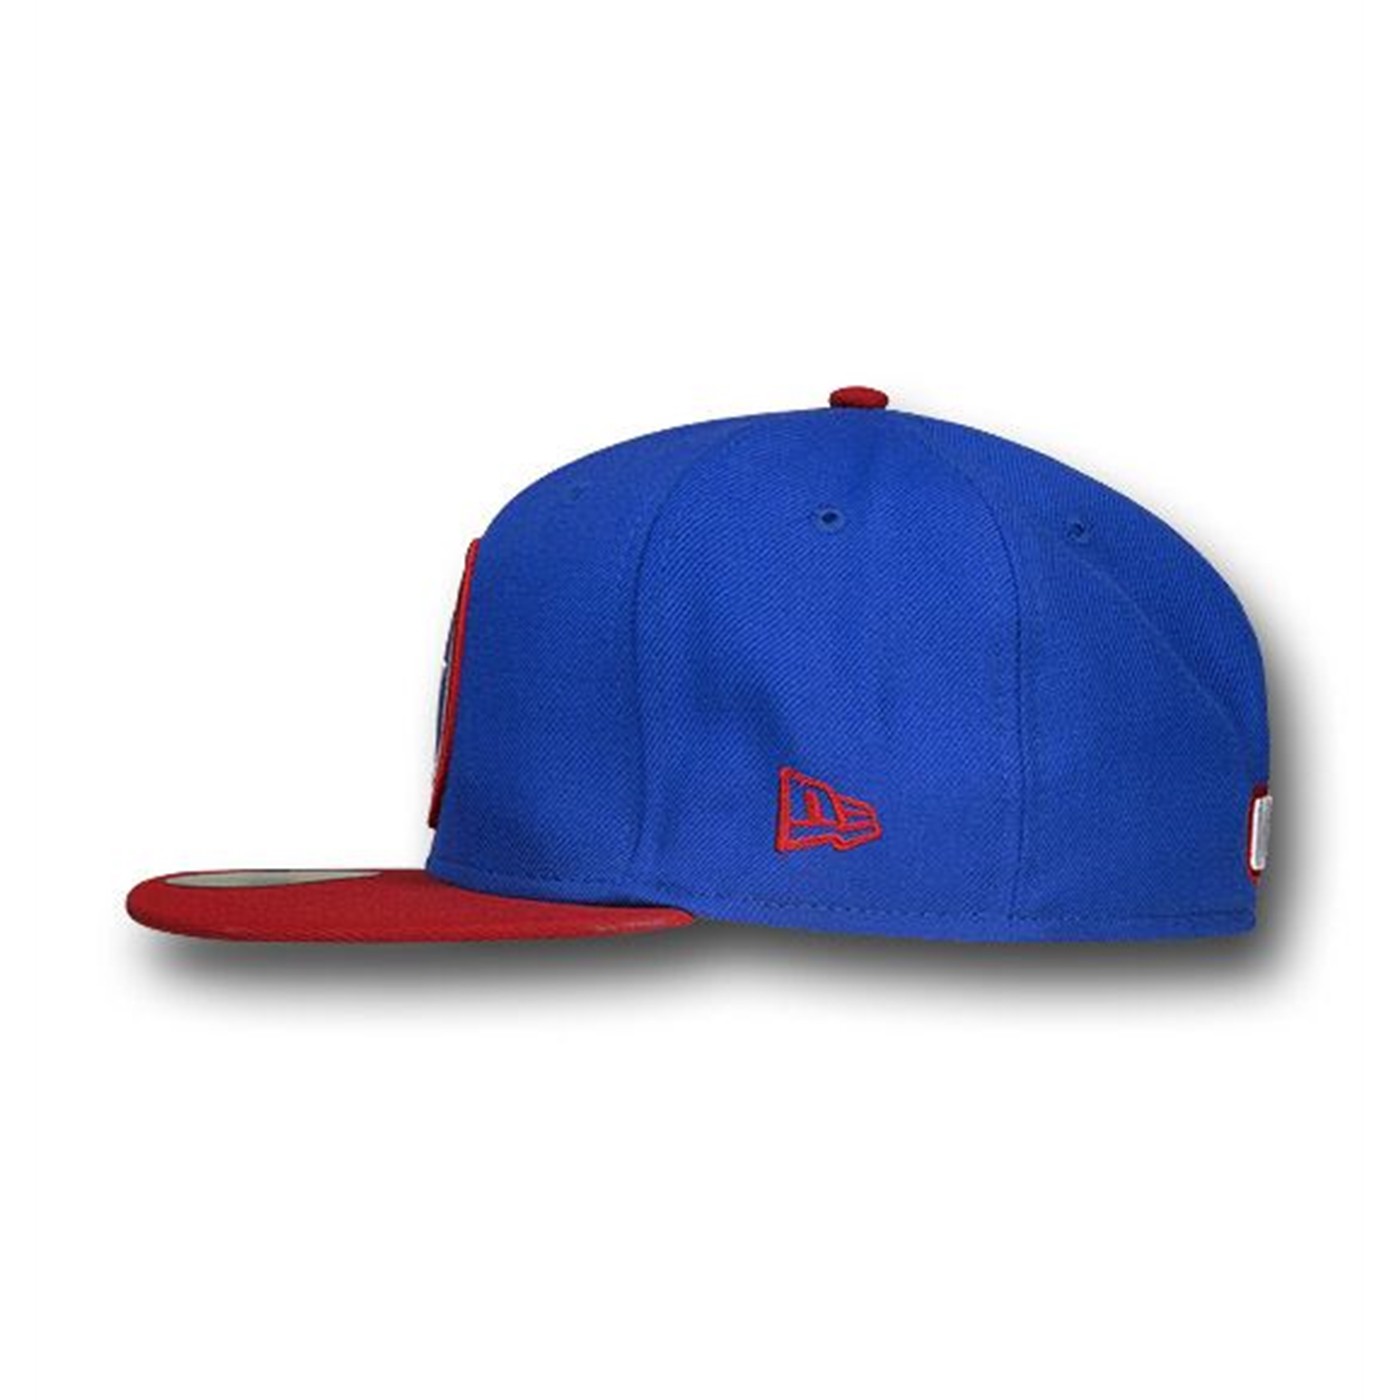 Captain America Side Image Flat Bill 59Fifty Cap